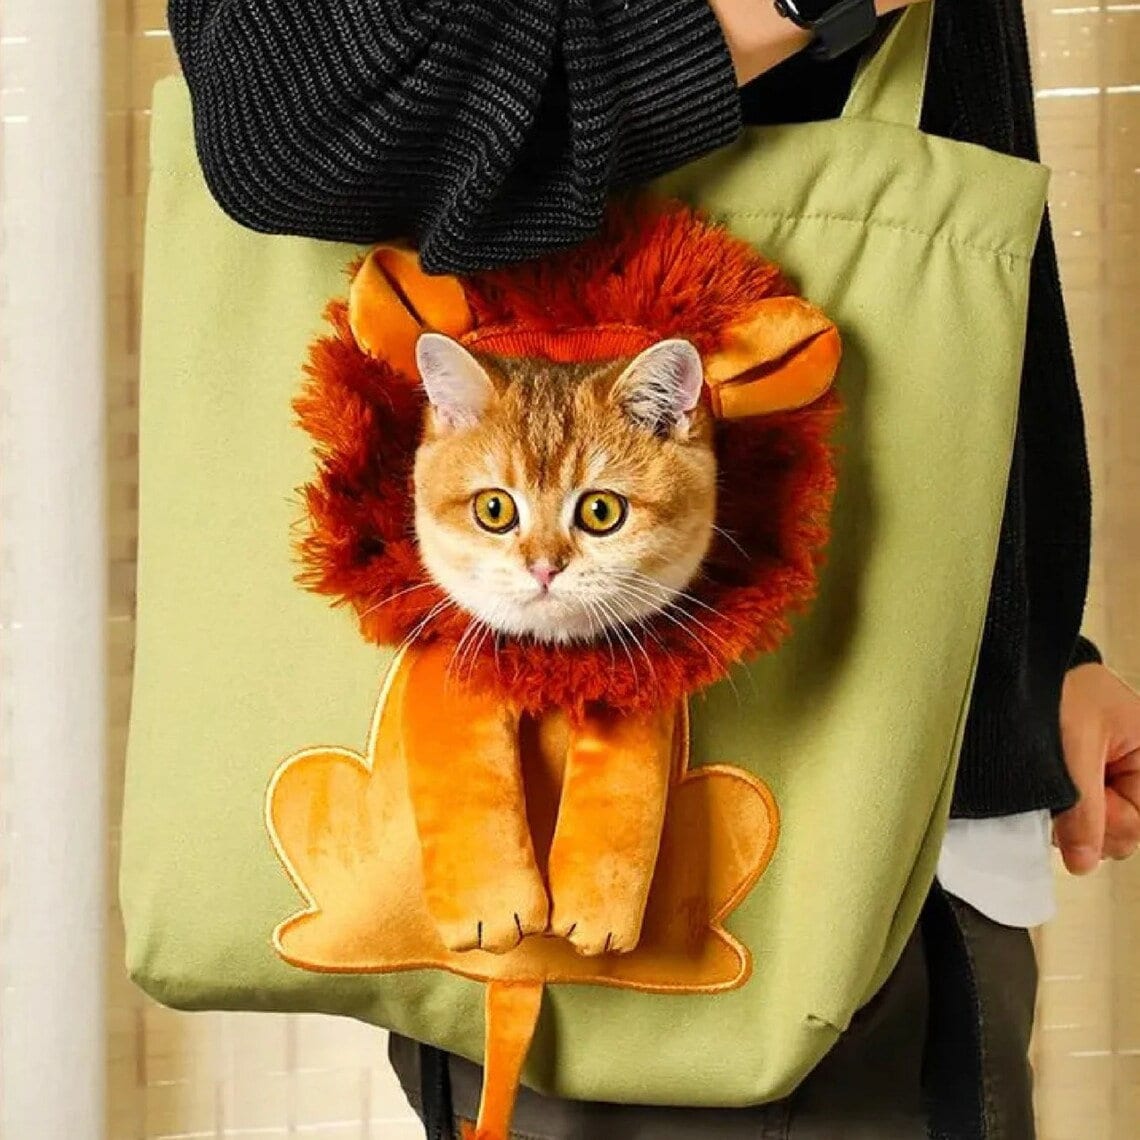 Buy Cat Carrier Online In India  Etsy India